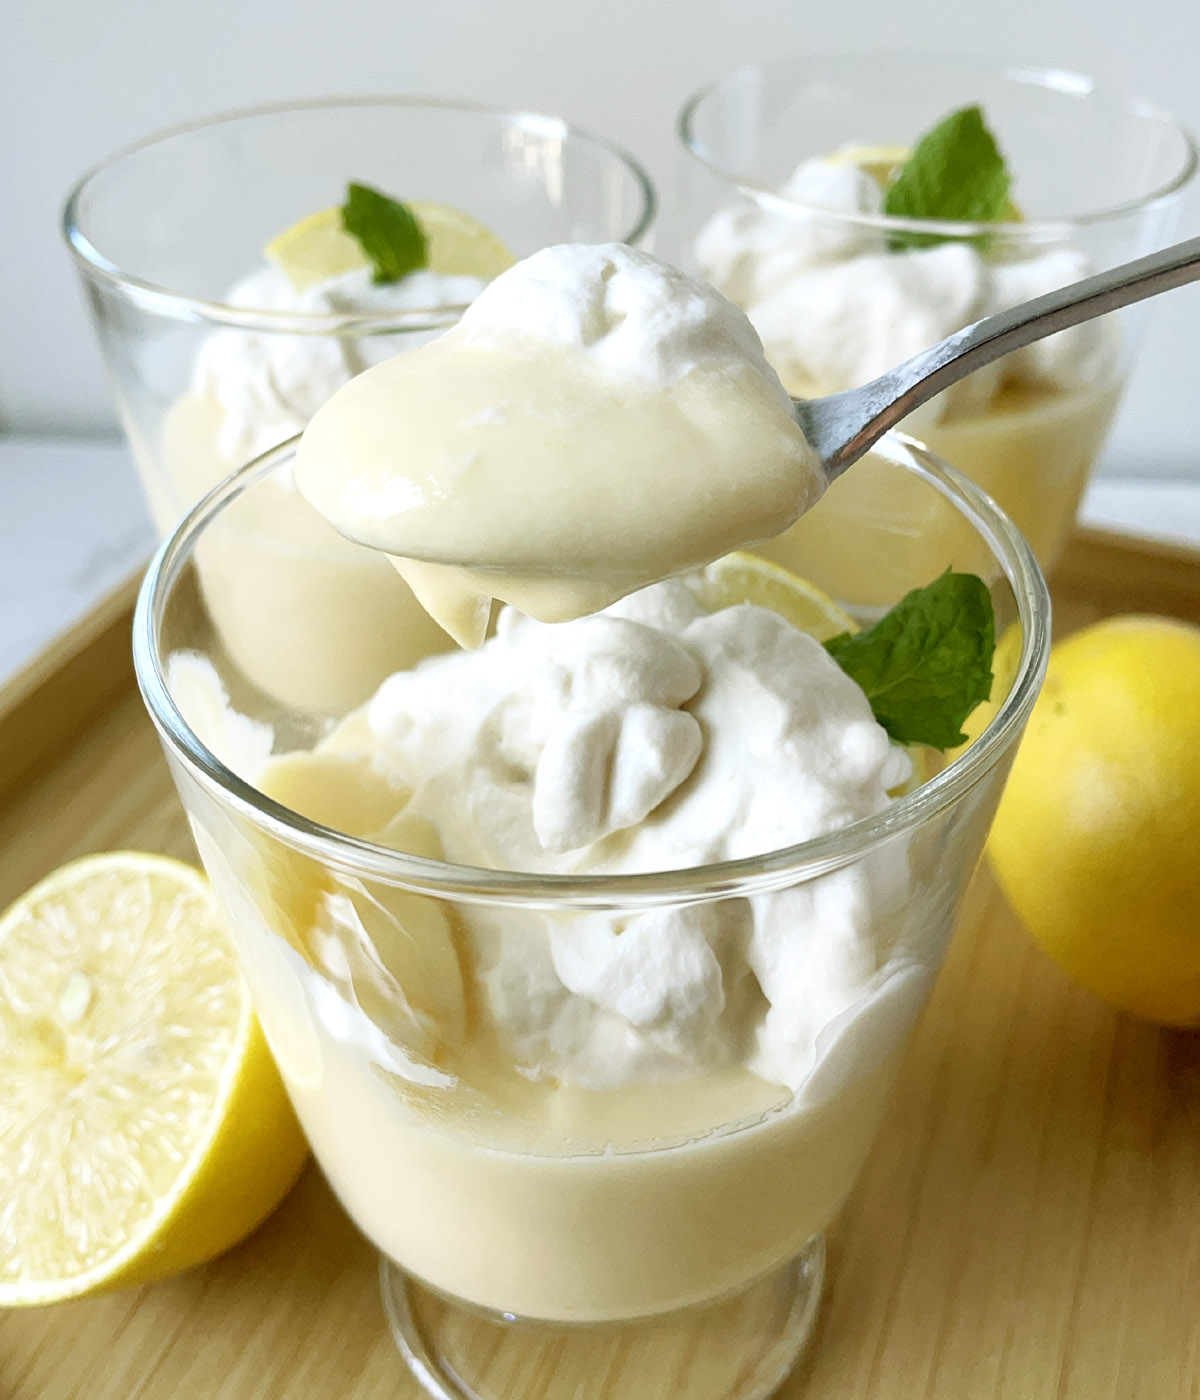 Close-up of a spoonful of lemon pudding and whipped cream over a glass dish.